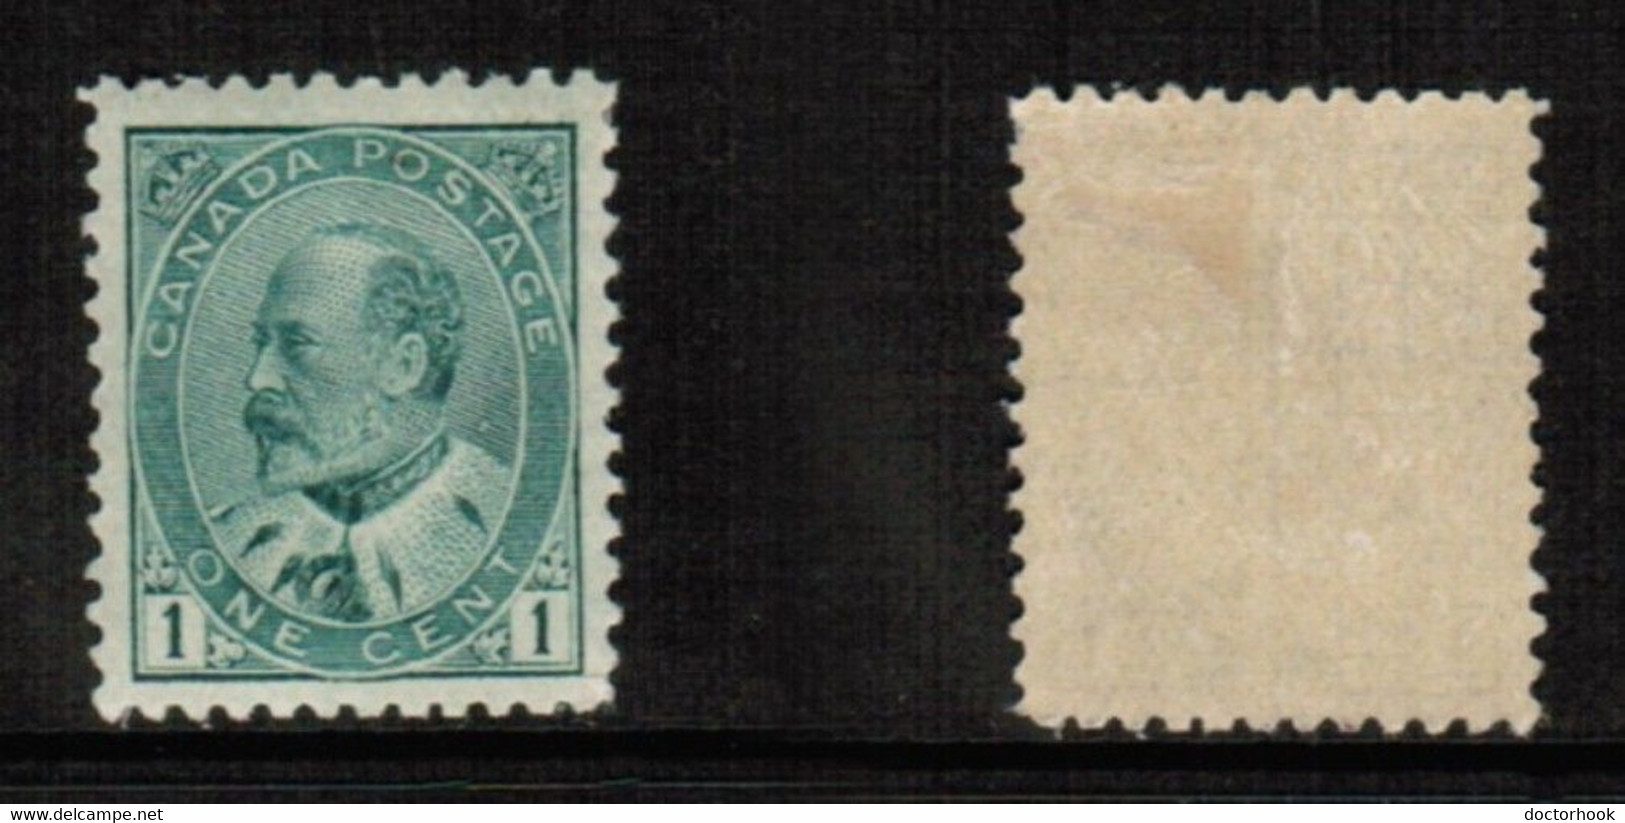 CANADA   Scott # 89* MINT HINGED (CONDITION AS PER SCAN) (CAN-M-1-8) - Ungebraucht